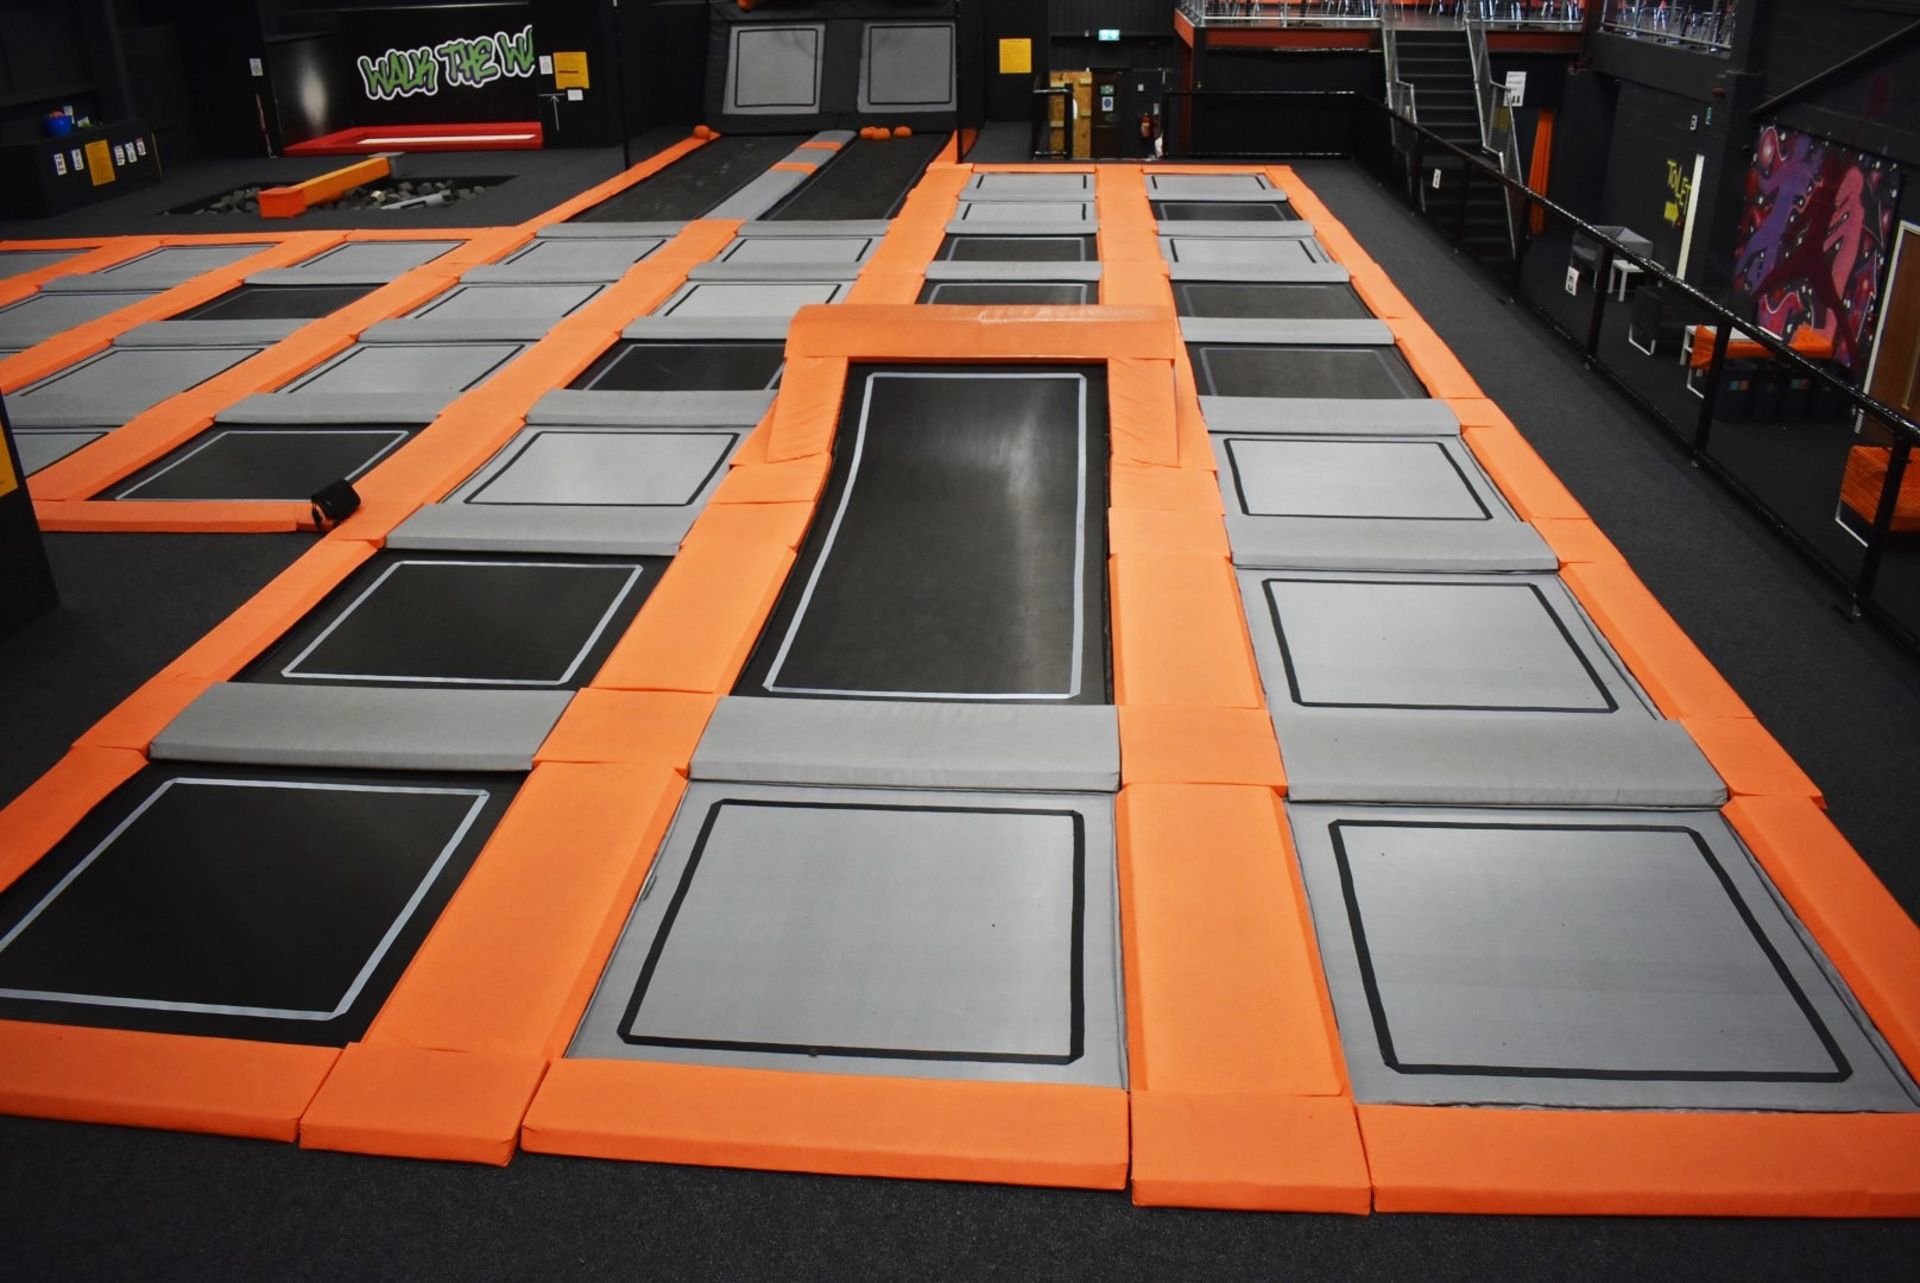 1 x Large Trampoline Park - Disassembled - Includes Dodgeball Arena And Jump Tower - CL766  - - Image 12 of 99